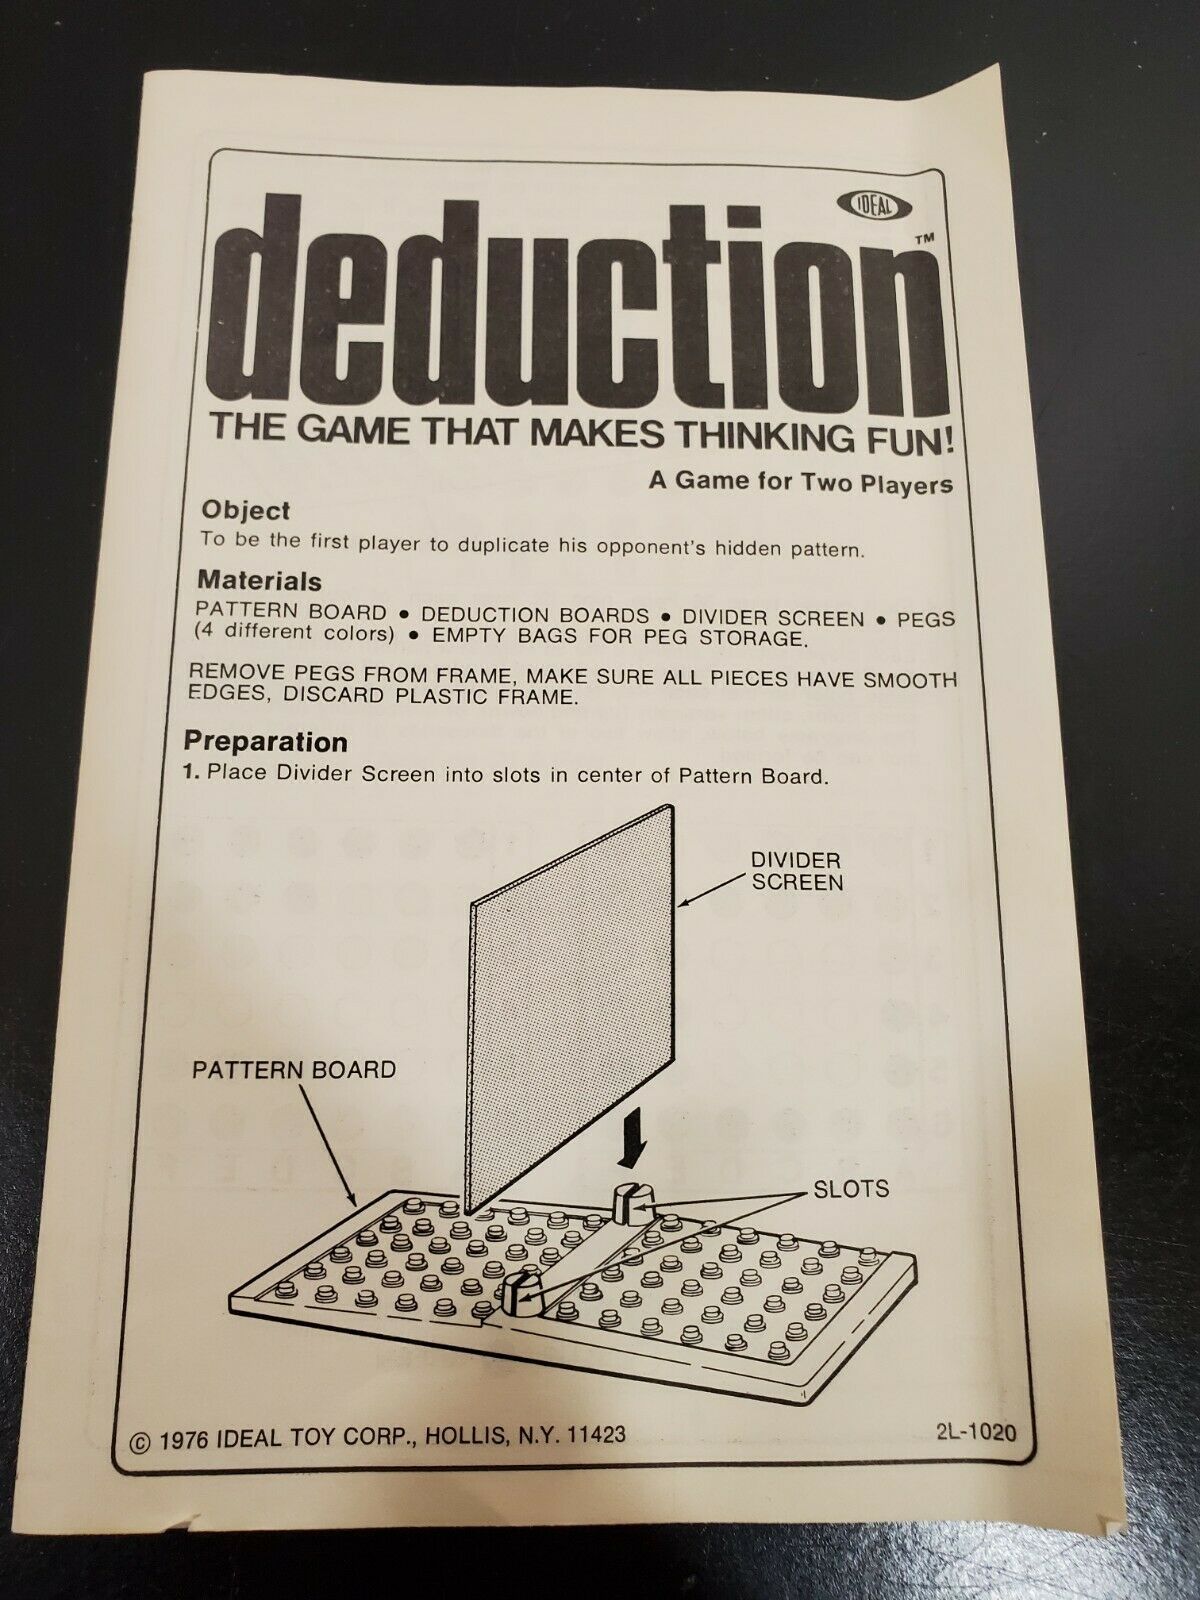 1976 Ideal deduction Game replacement parts - You Choose - $2.75 - $3.00